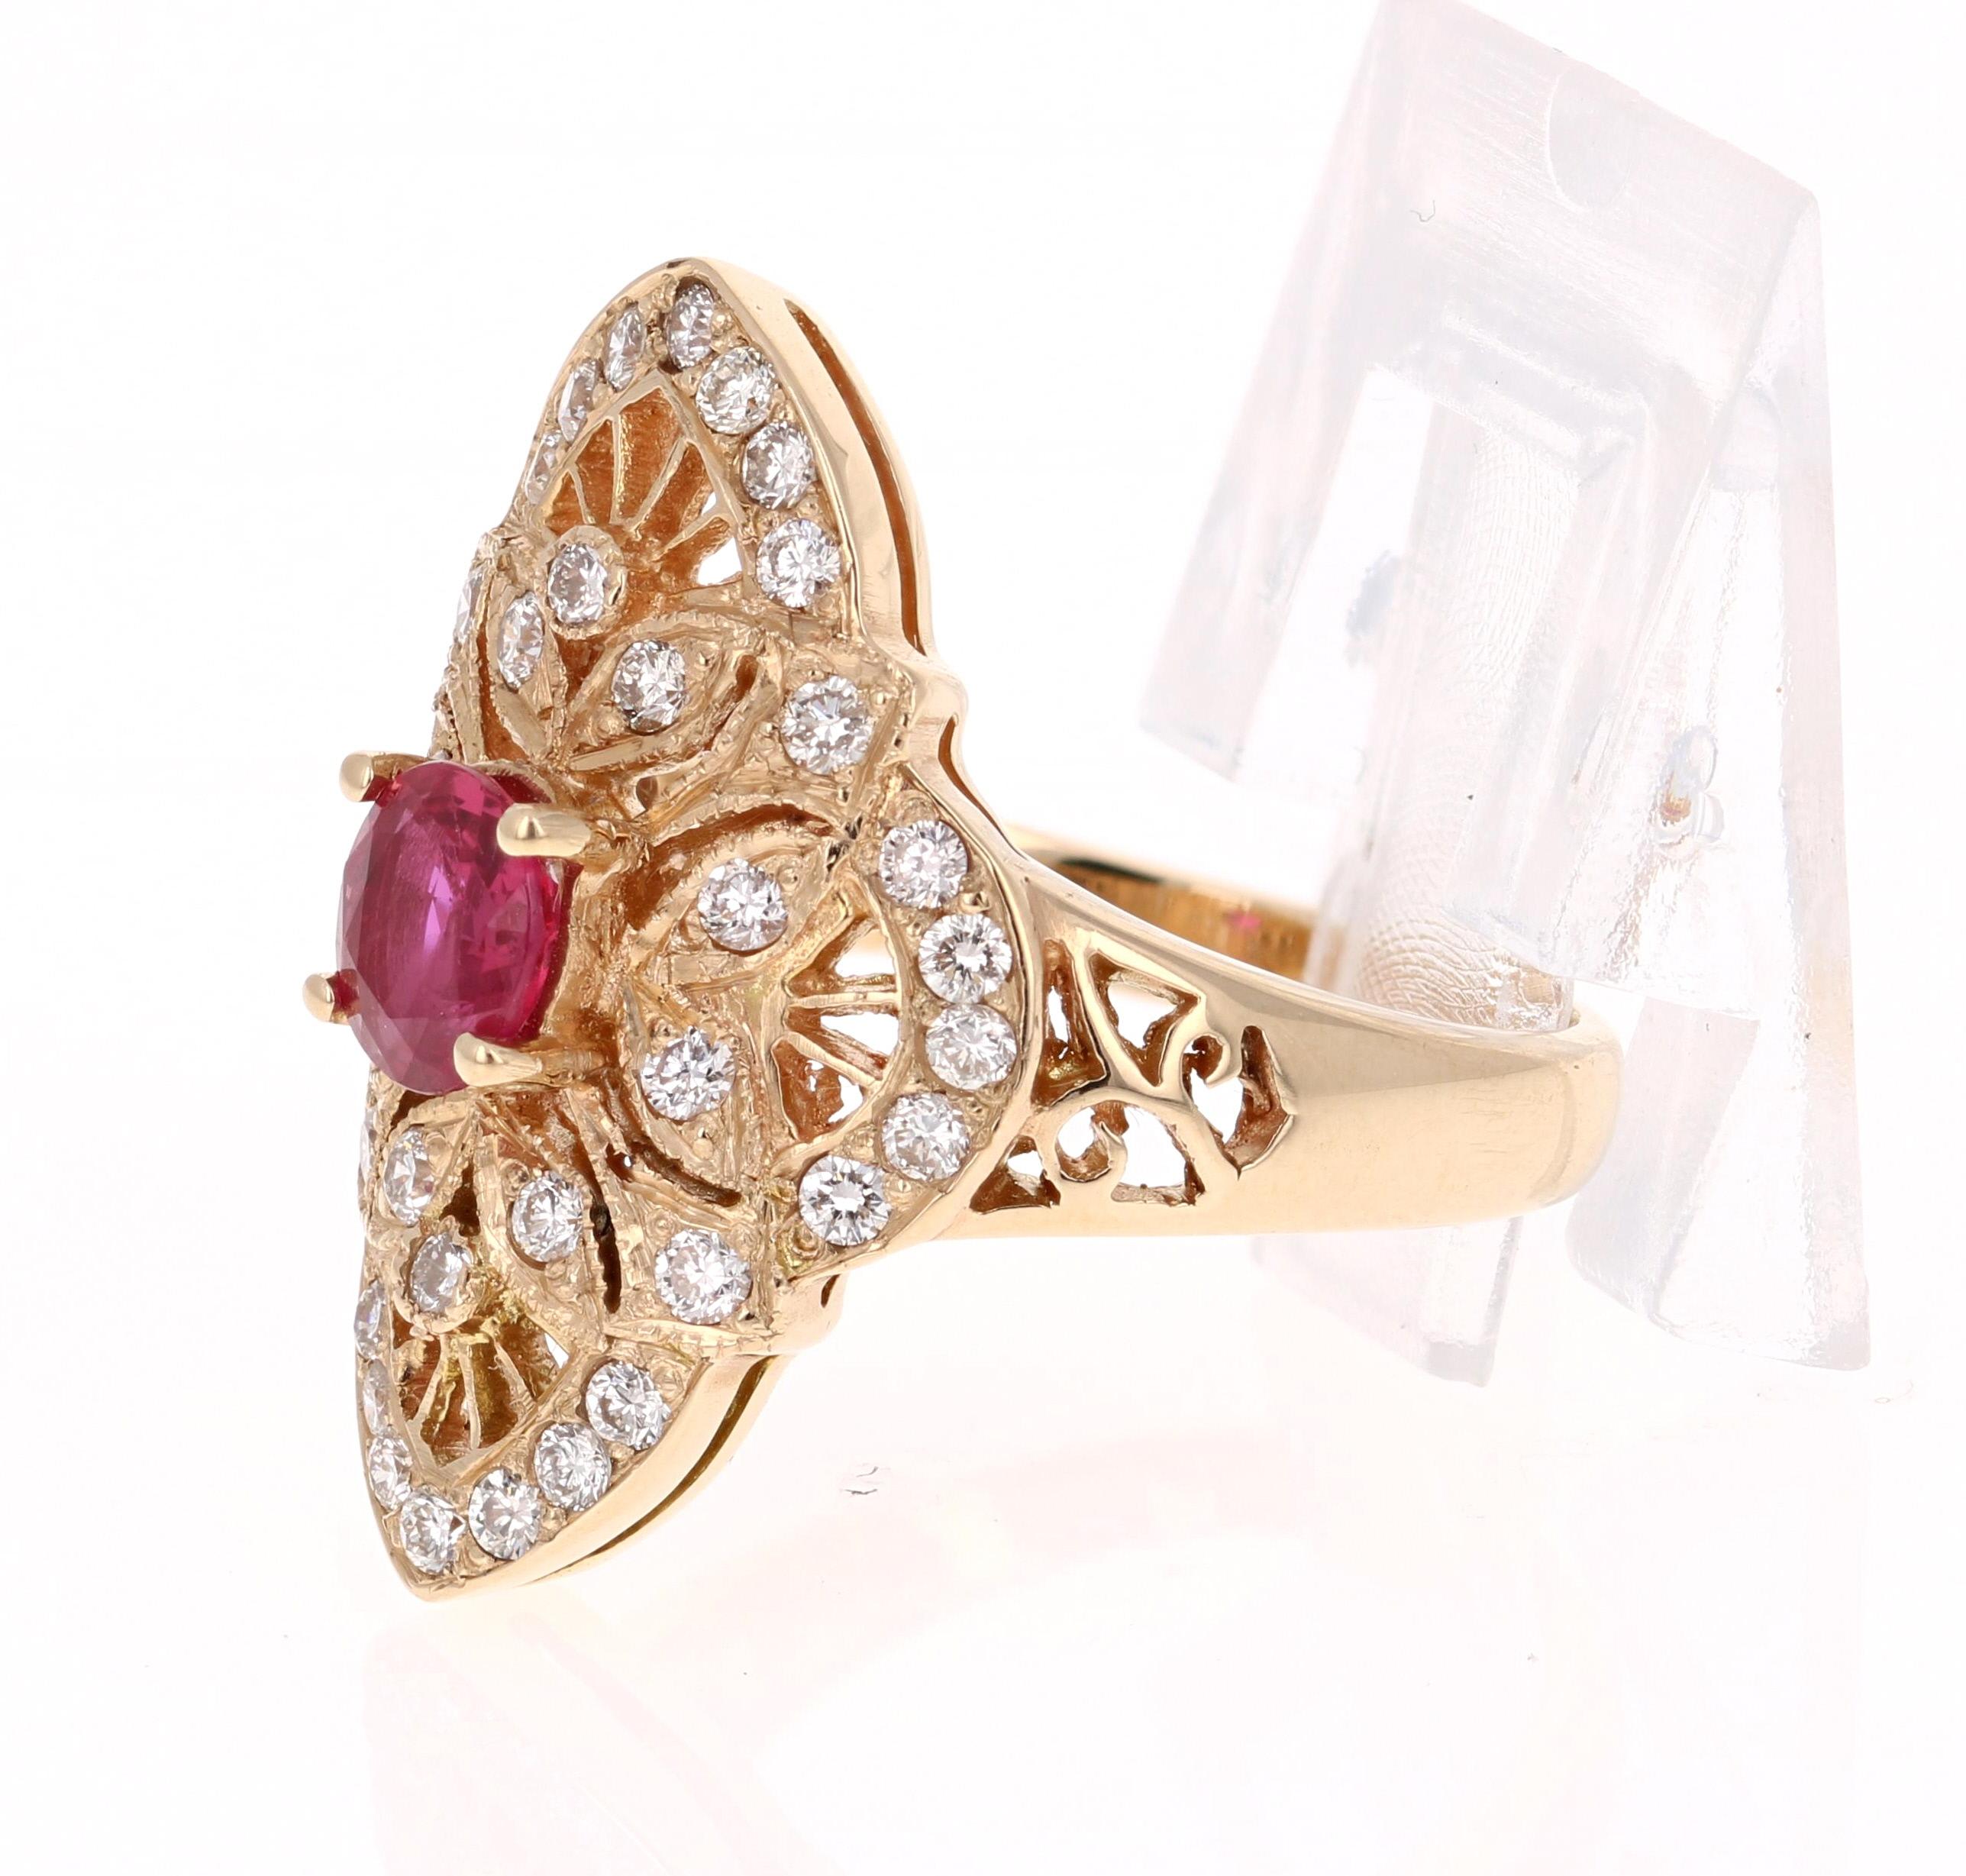 Early Victorian 1.34 Carat Ruby Diamond 14 Karat Yellow Gold Victorian Style Ring For Sale